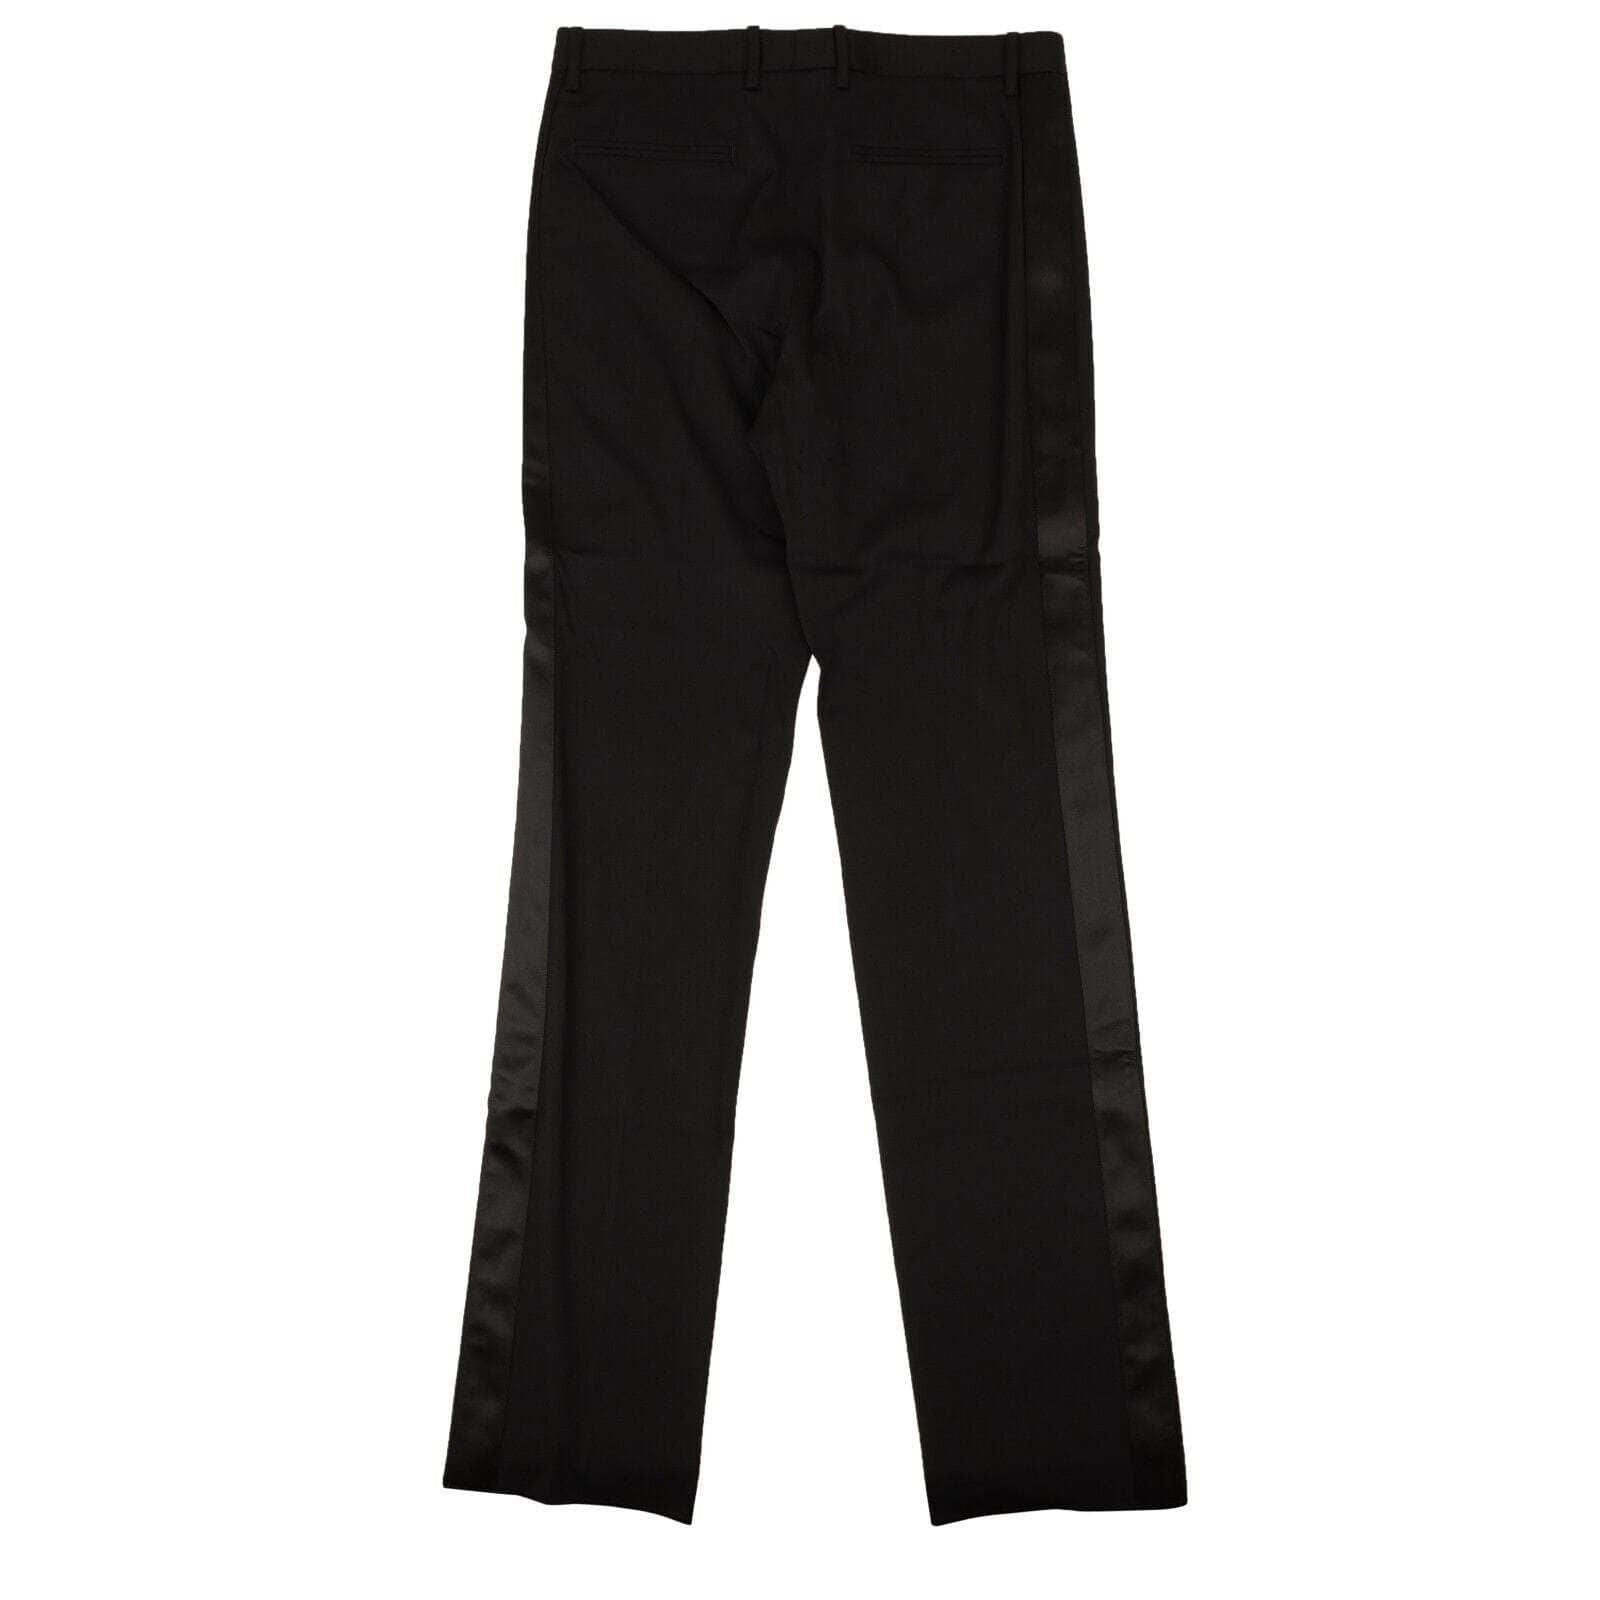 Off-White c/o Virgil Abloh 500-750, channelenable-all, chicmi, couponcollection, gender-mens, main-clothing, mens-dress-pants, mens-shoes, off-white-c-o-virgil-abloh, size-46, size-48 48 Black Tuxedo Zipped Clean Pants 95-OFW-0124/48 95-OFW-0124/48